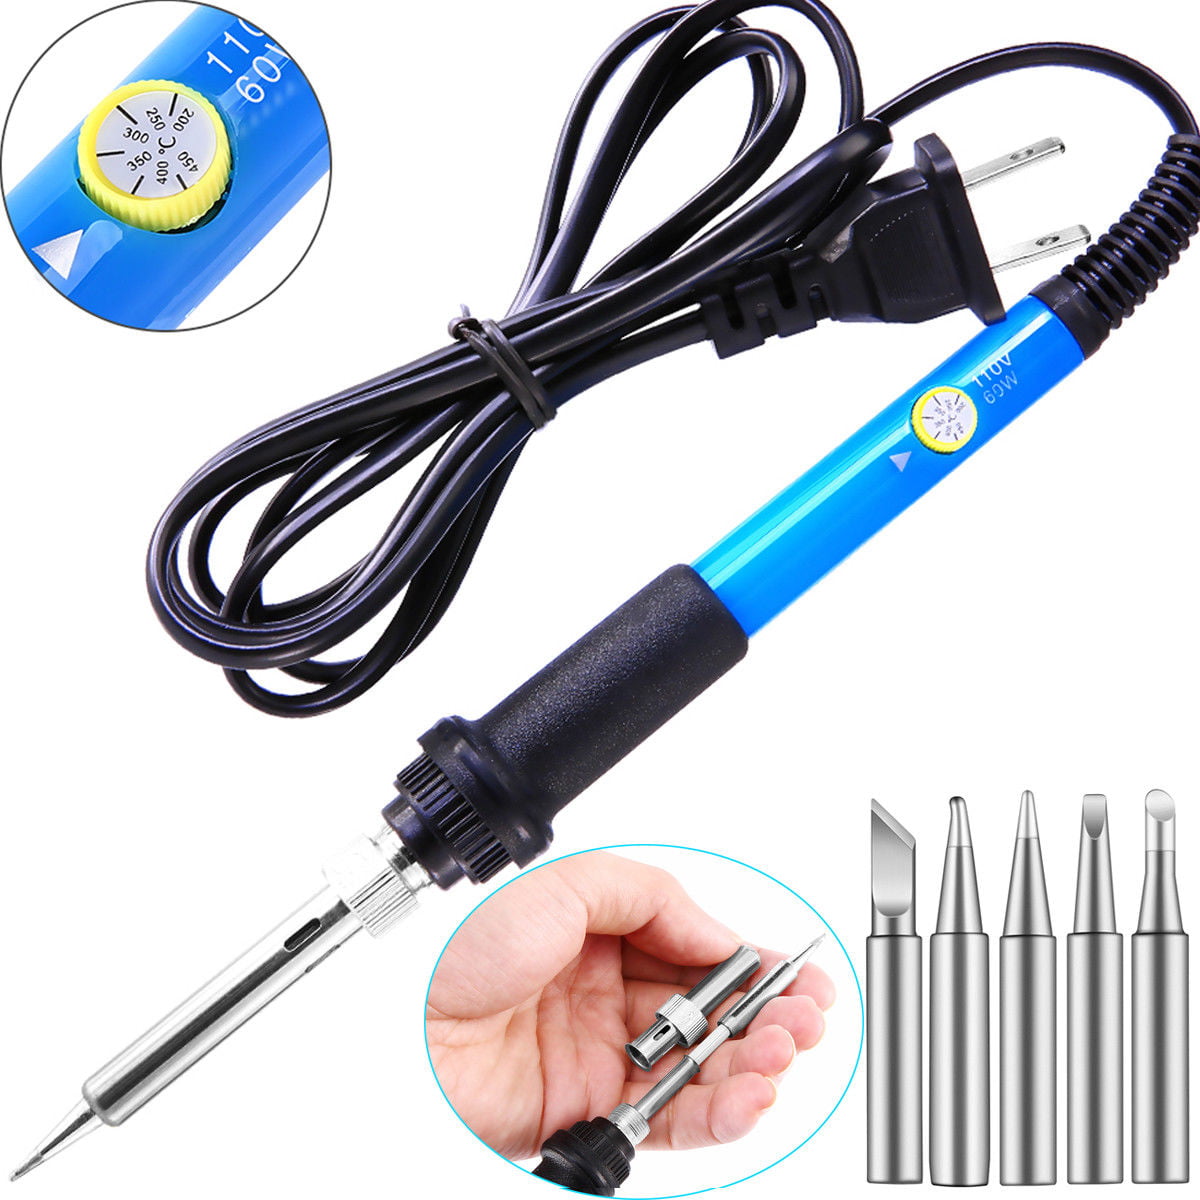 18-In-1 Soldering Iron Kit 60W 220V Electronics Welding Irons Tool Repair Gifts 